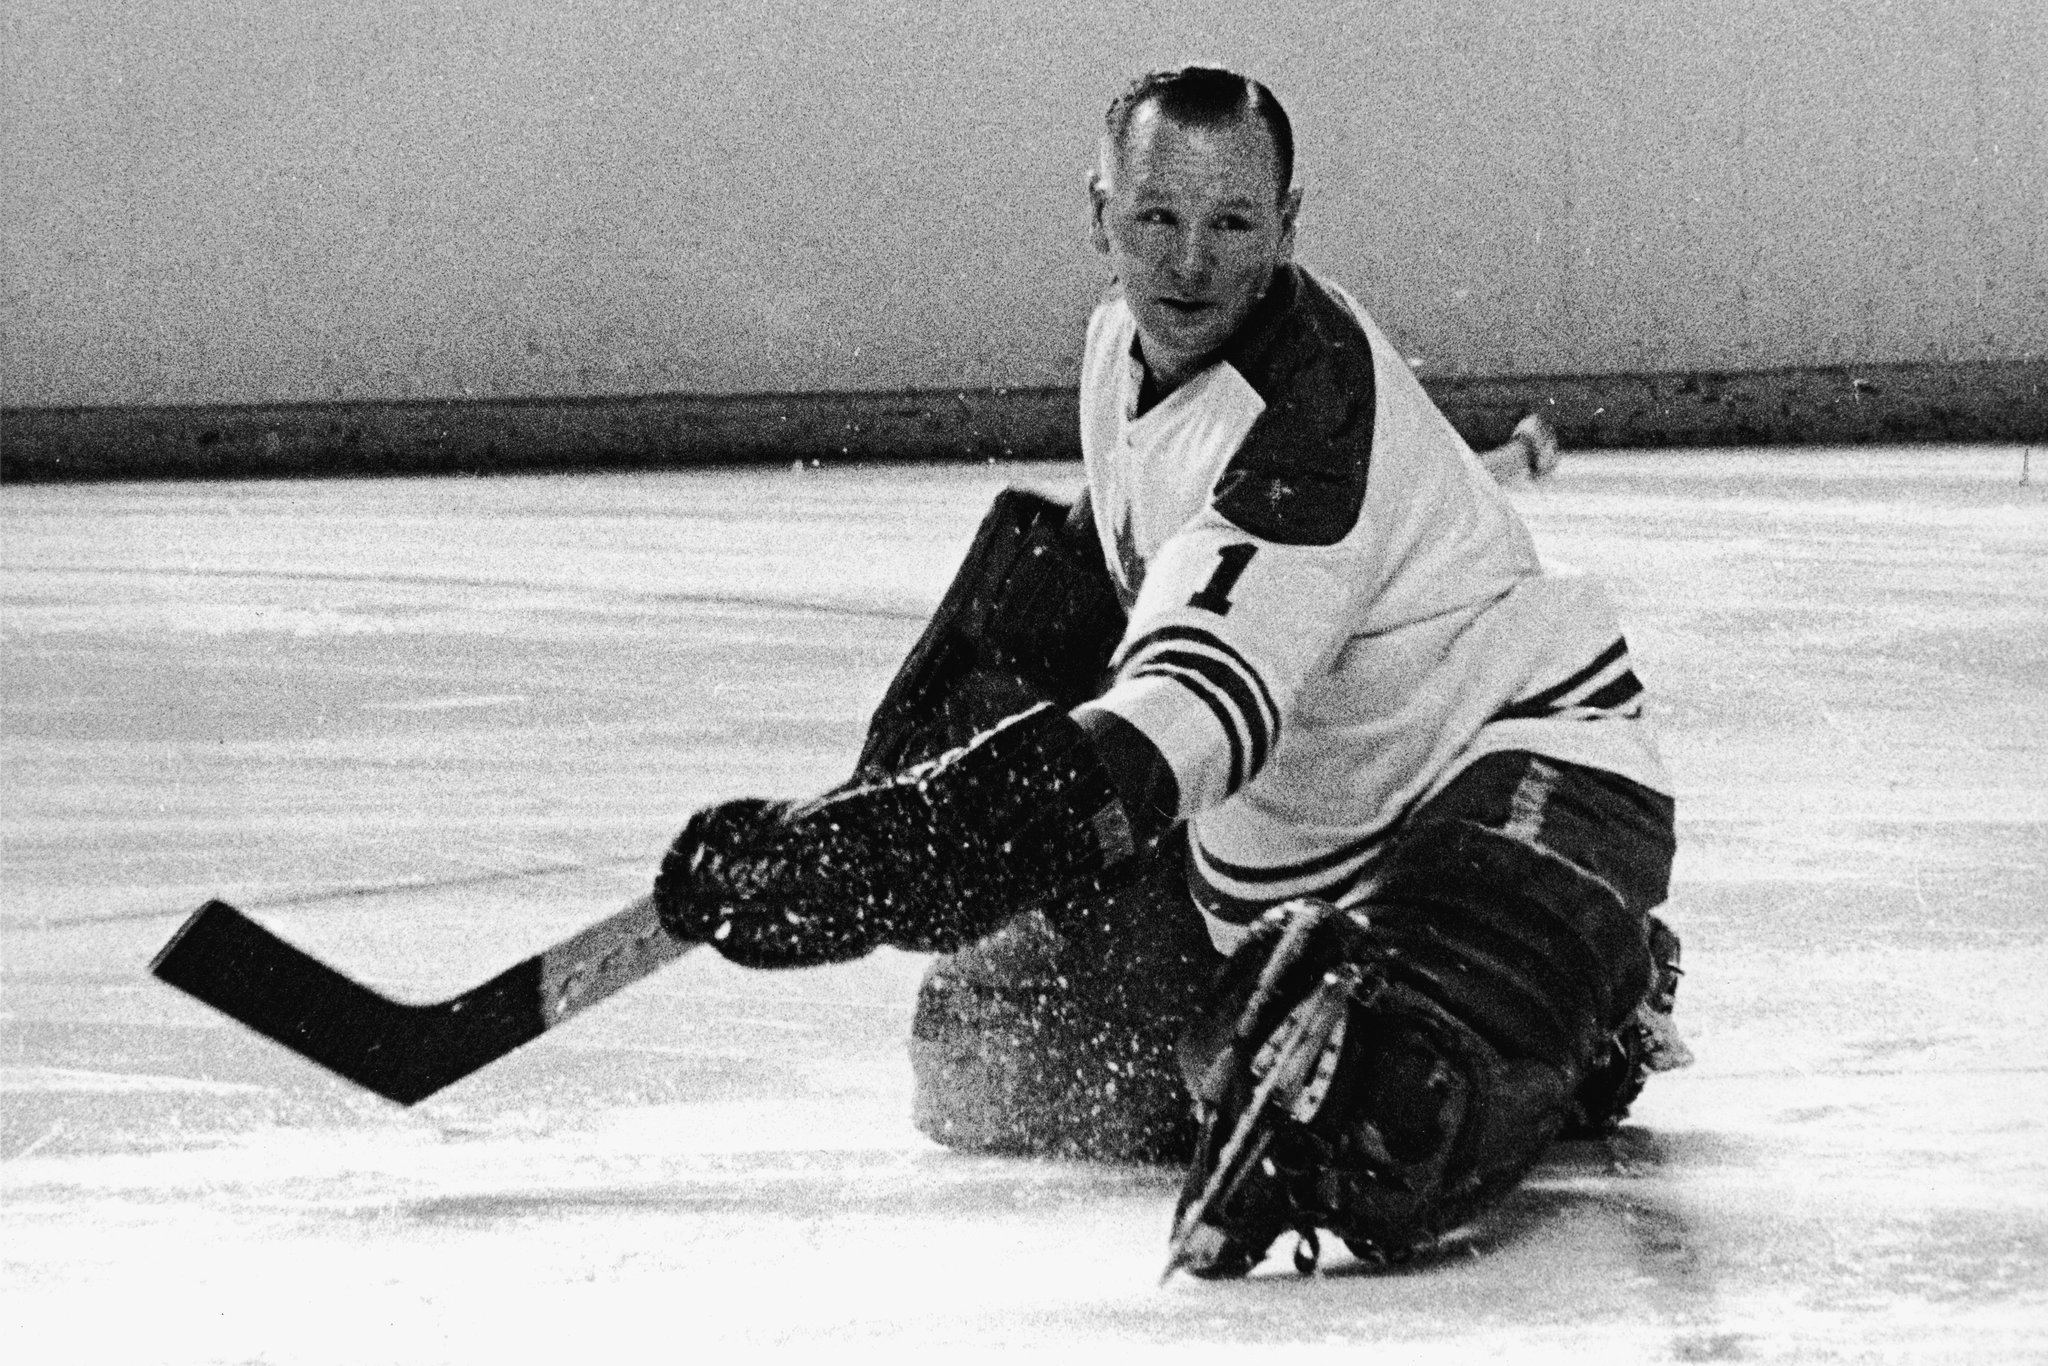 Bower in the 1960s with the Maple Leafs_Hulton Archive, via Getty Images